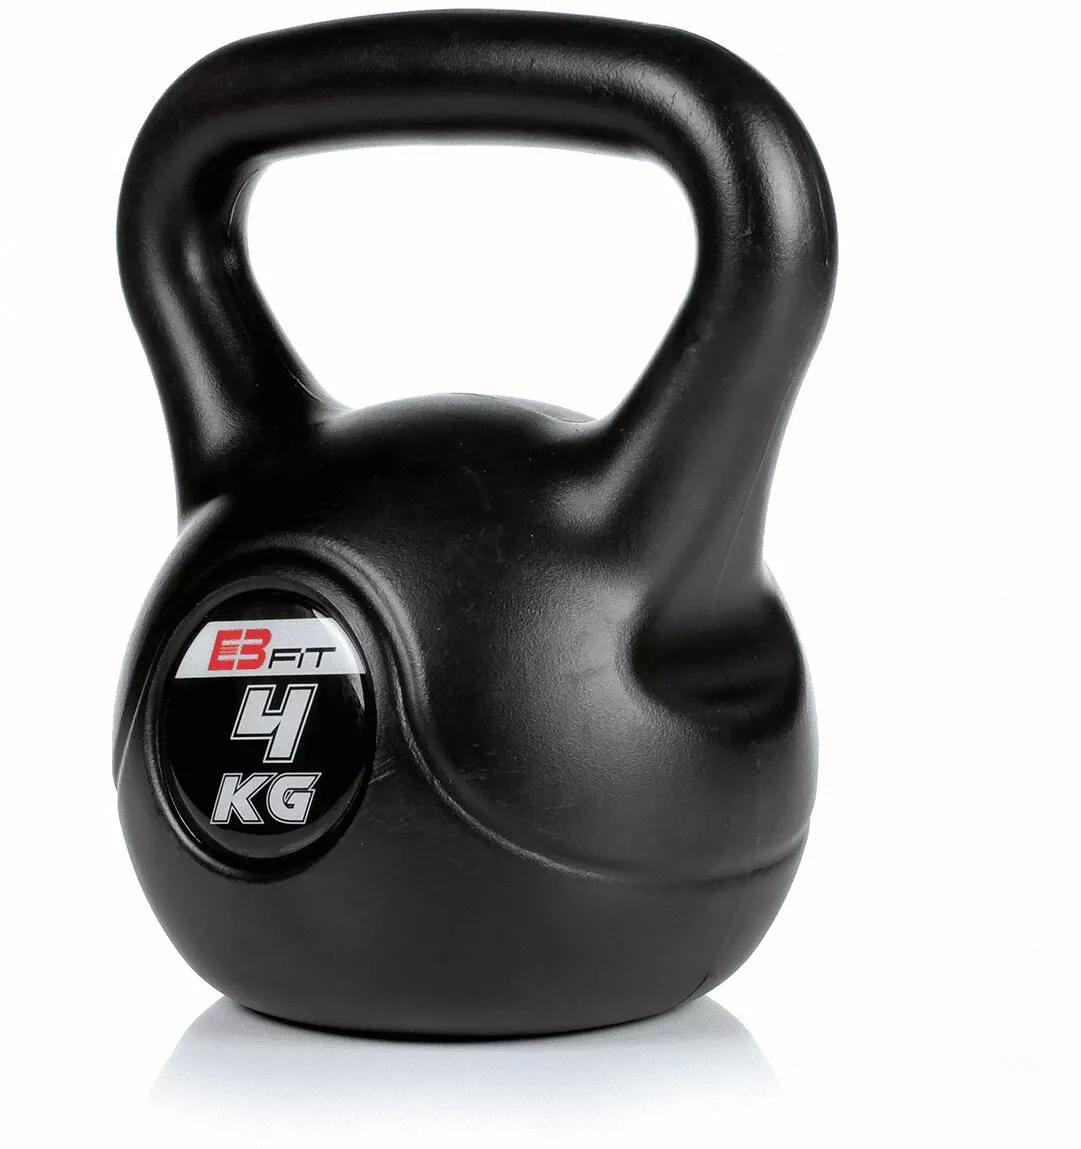 EB FIT kettlebell